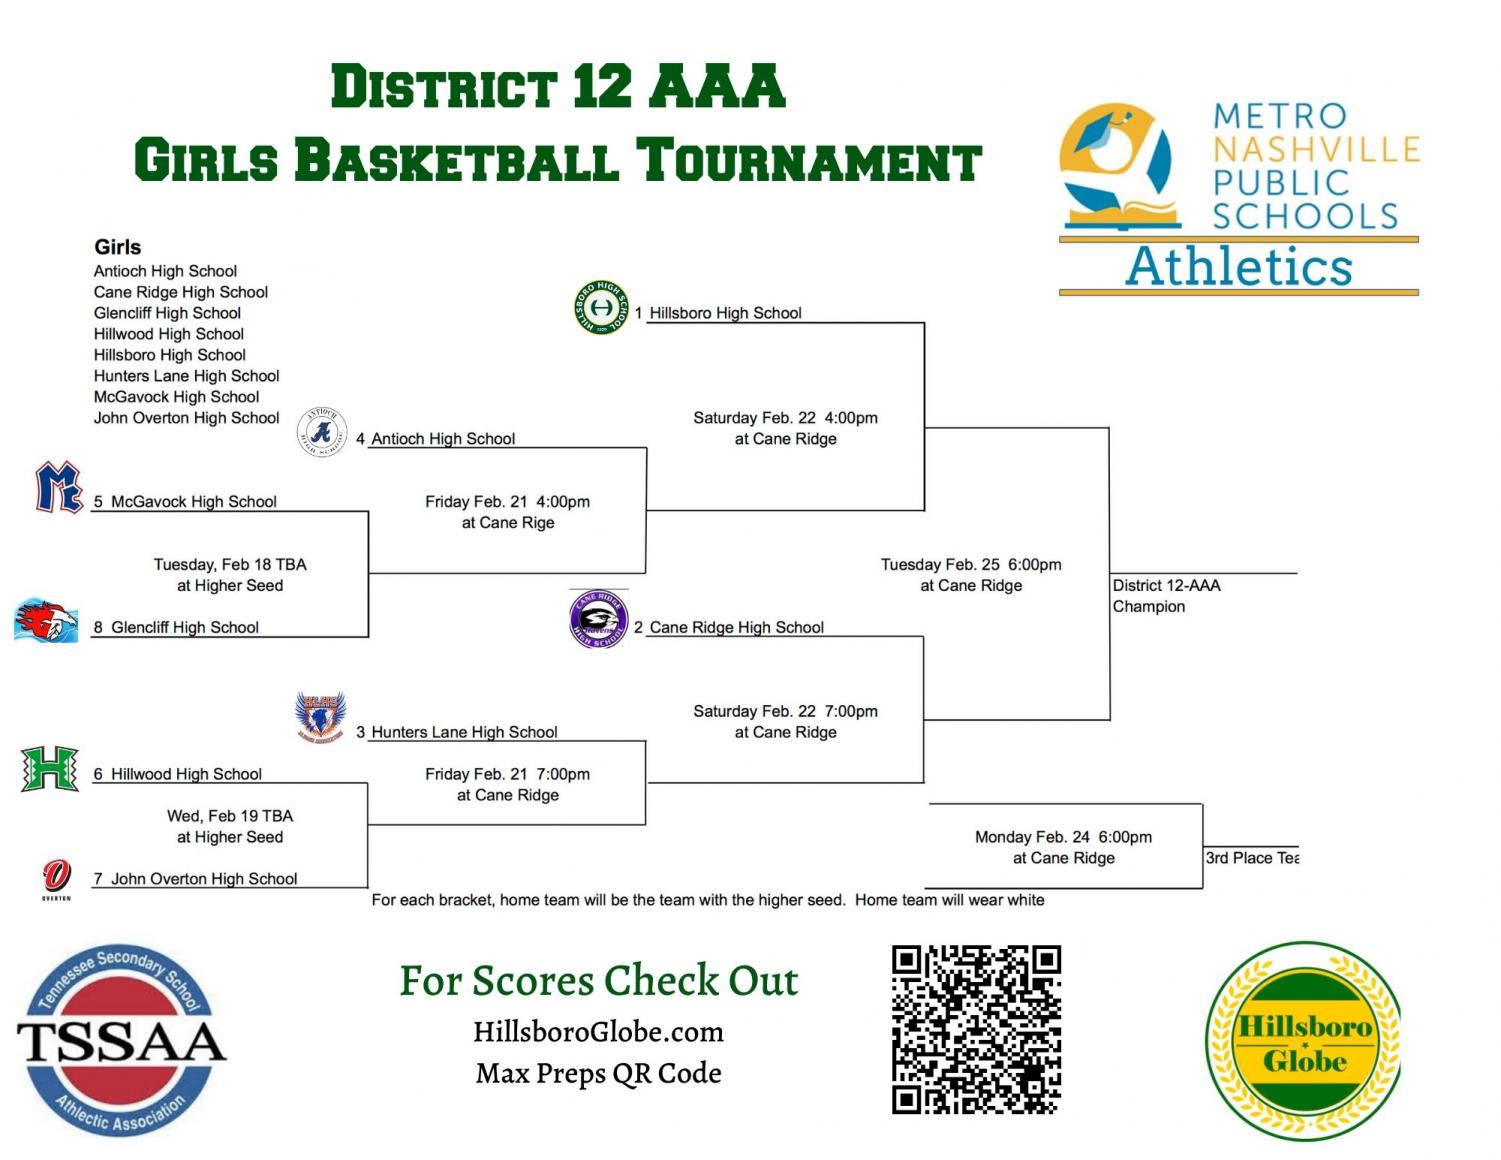 Metro+Athletics+Game+Report%3A+Cane+Ridge+secures+District+12+AAA+regular+season+title+with+win+over+Hillsboro